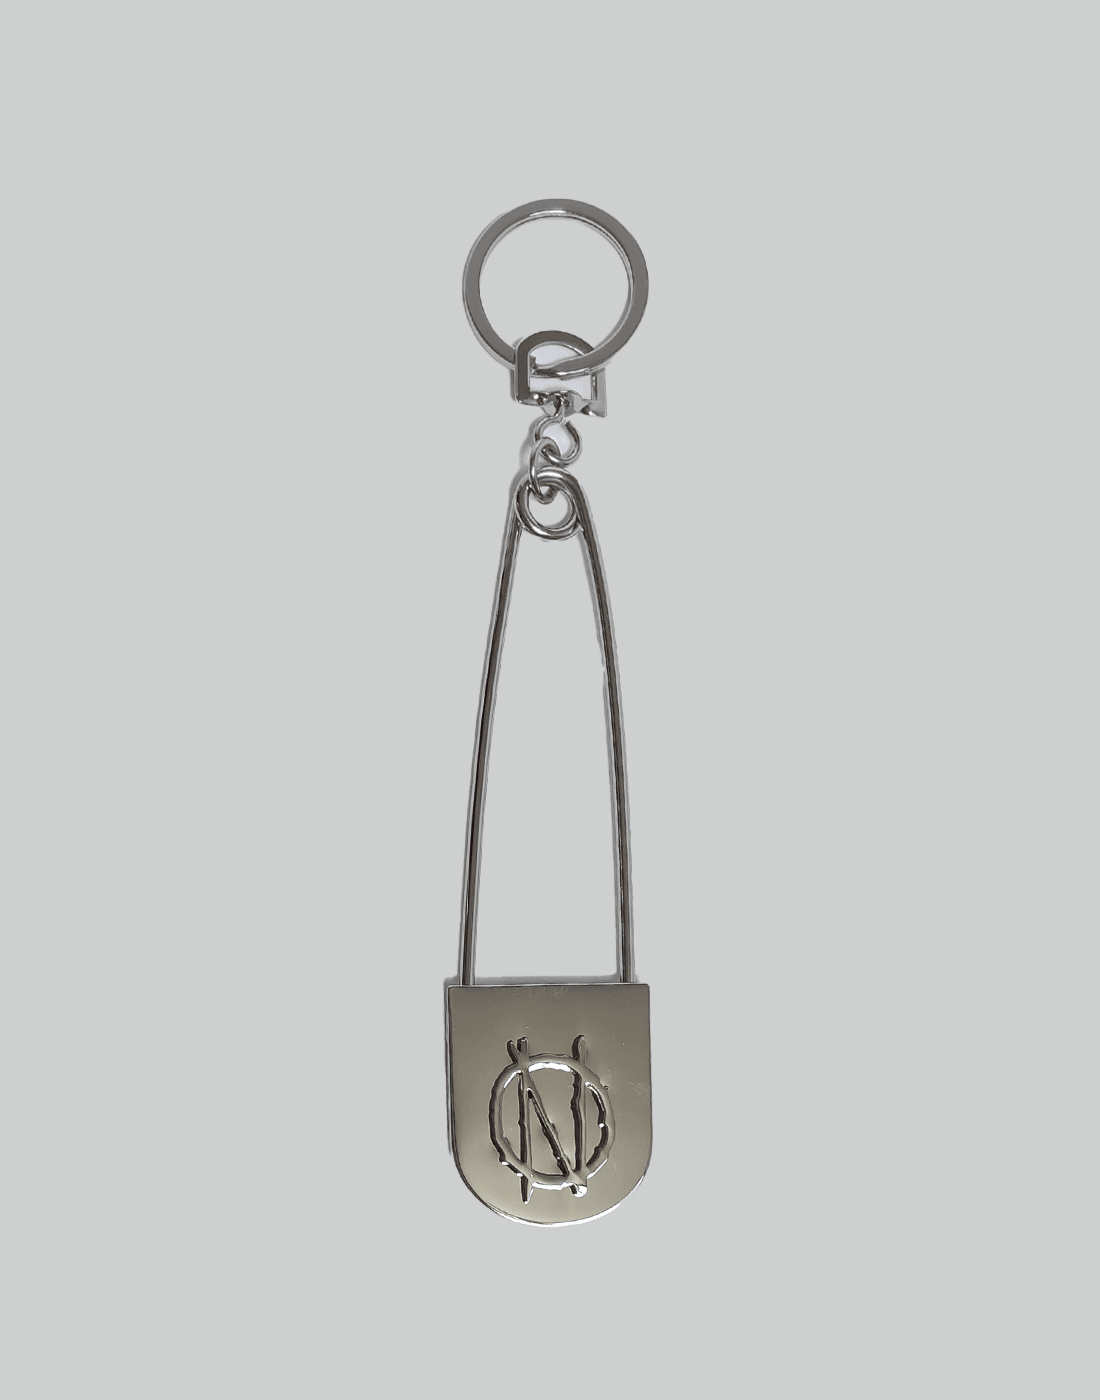 99%IS- "1%ove" SAFETY PIN KEYCHAIN - 082plus